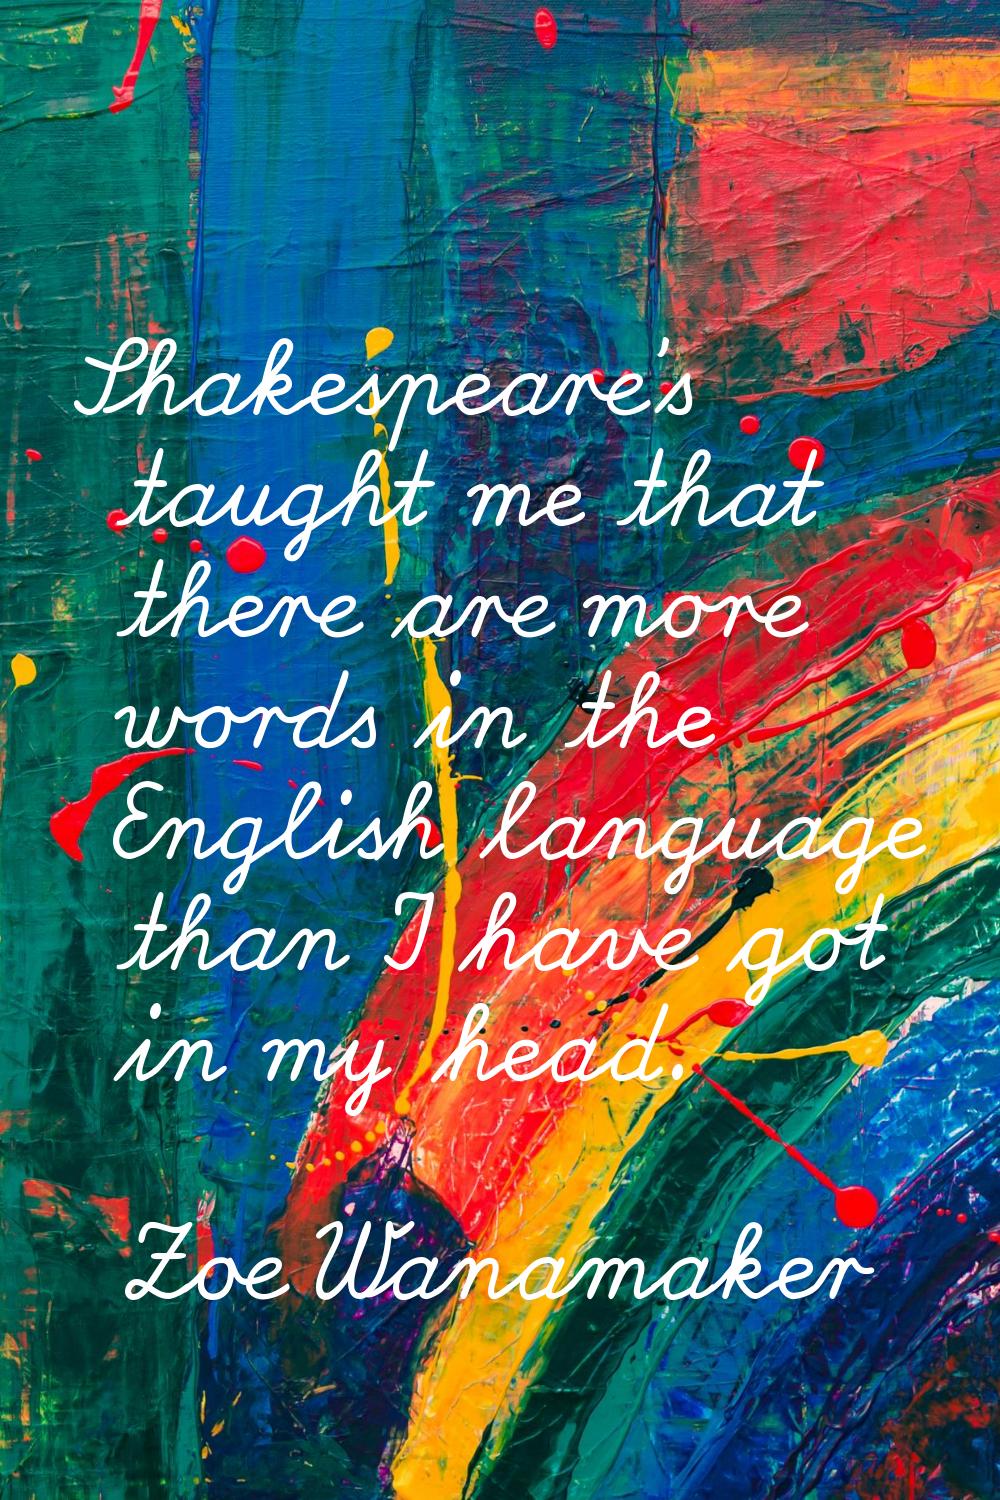 Shakespeare's taught me that there are more words in the English language than I have got in my hea